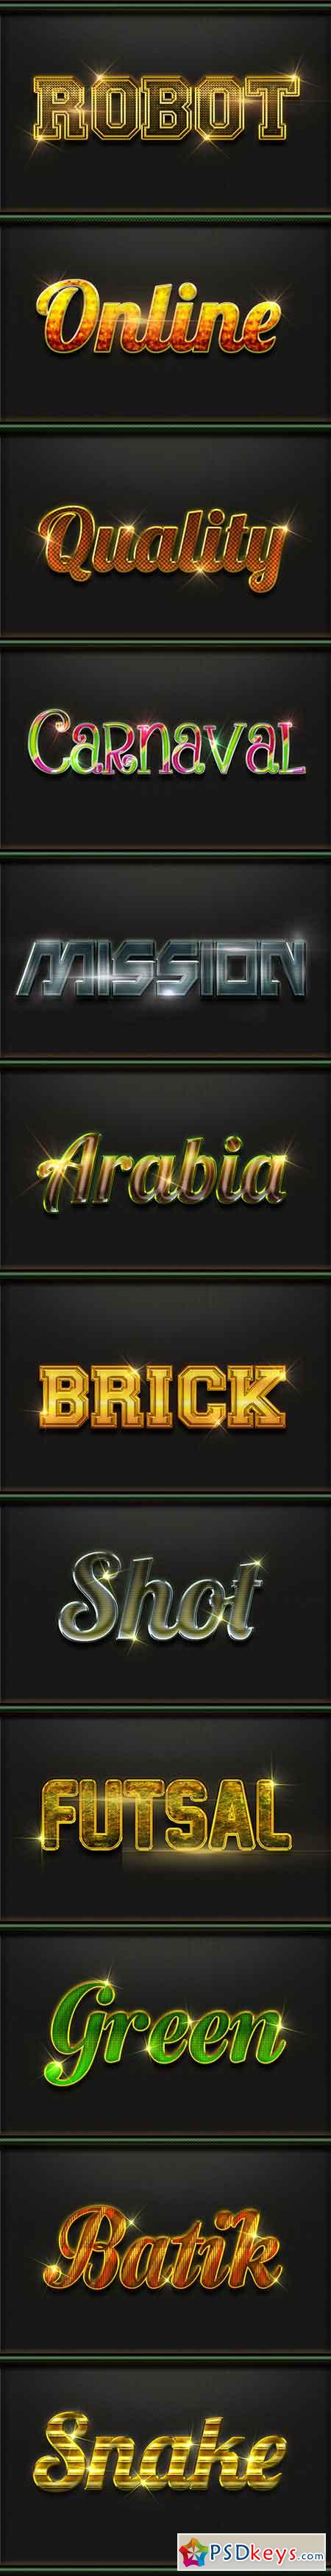 12 Photoshop Text Effect Styles 20167363